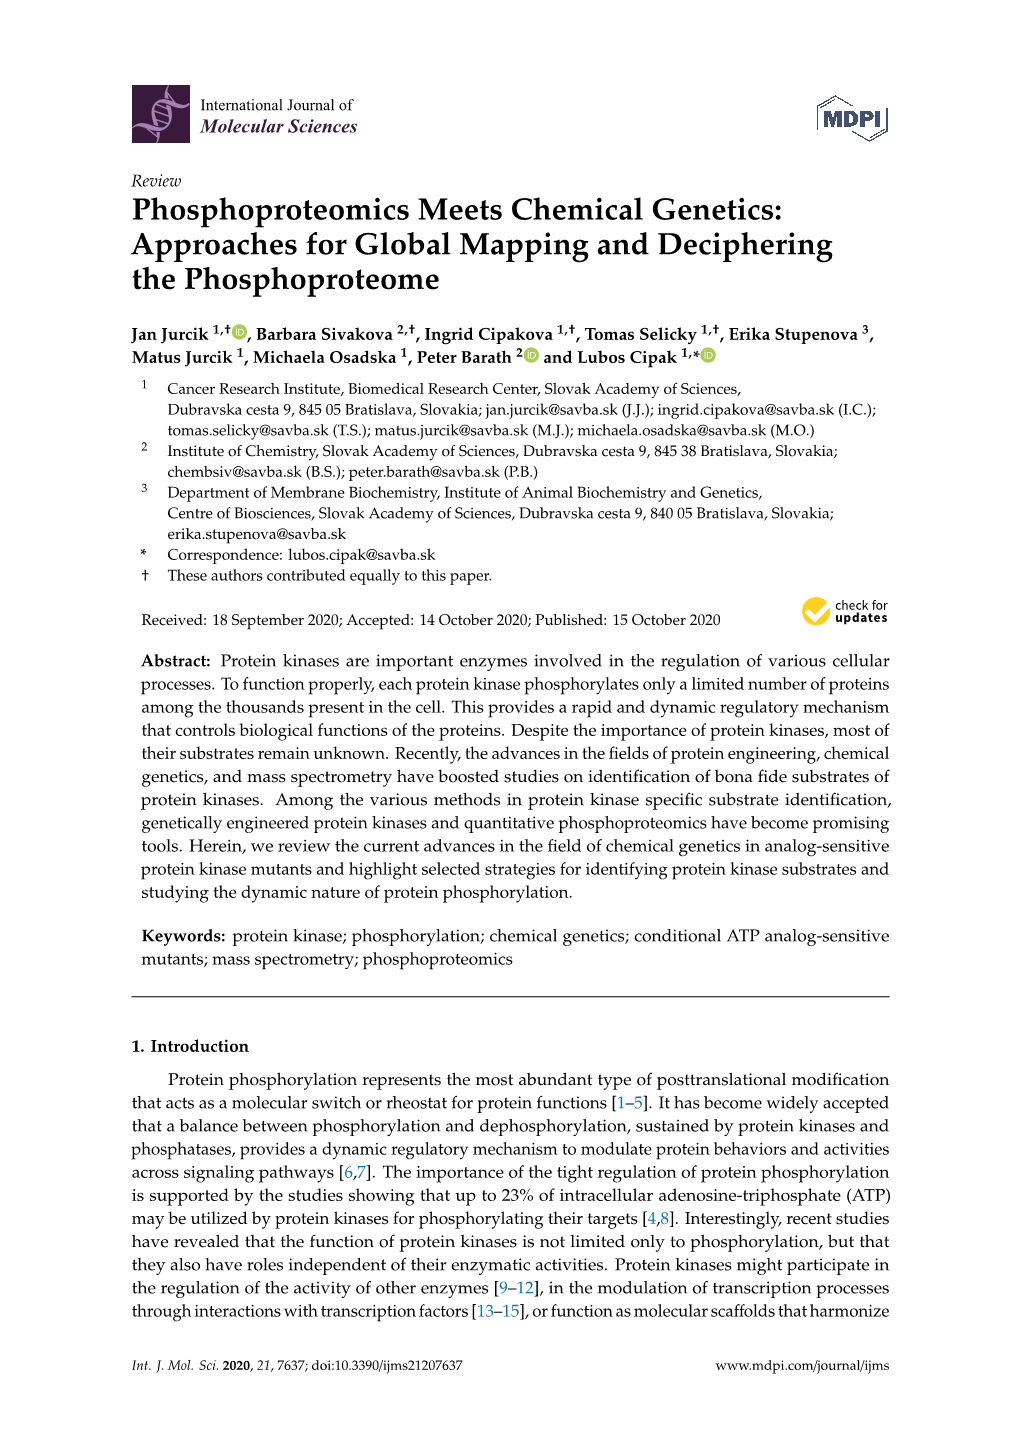 Phosphoproteomics Meets Chemical Genetics: Approaches for Global Mapping and Deciphering the Phosphoproteome